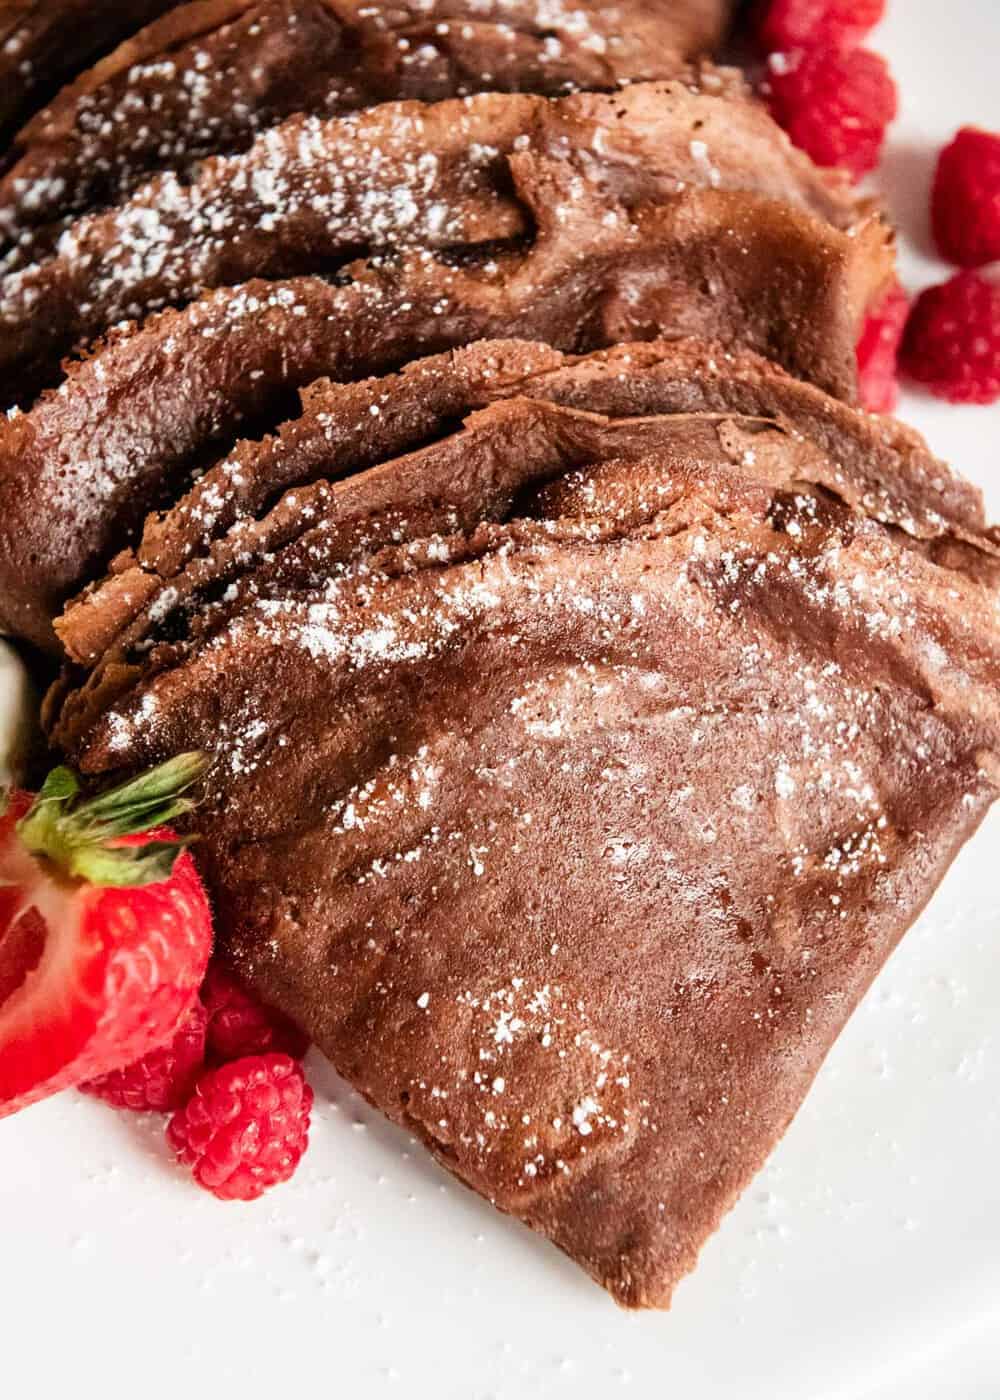 Chocolate crepes with fresh berries.